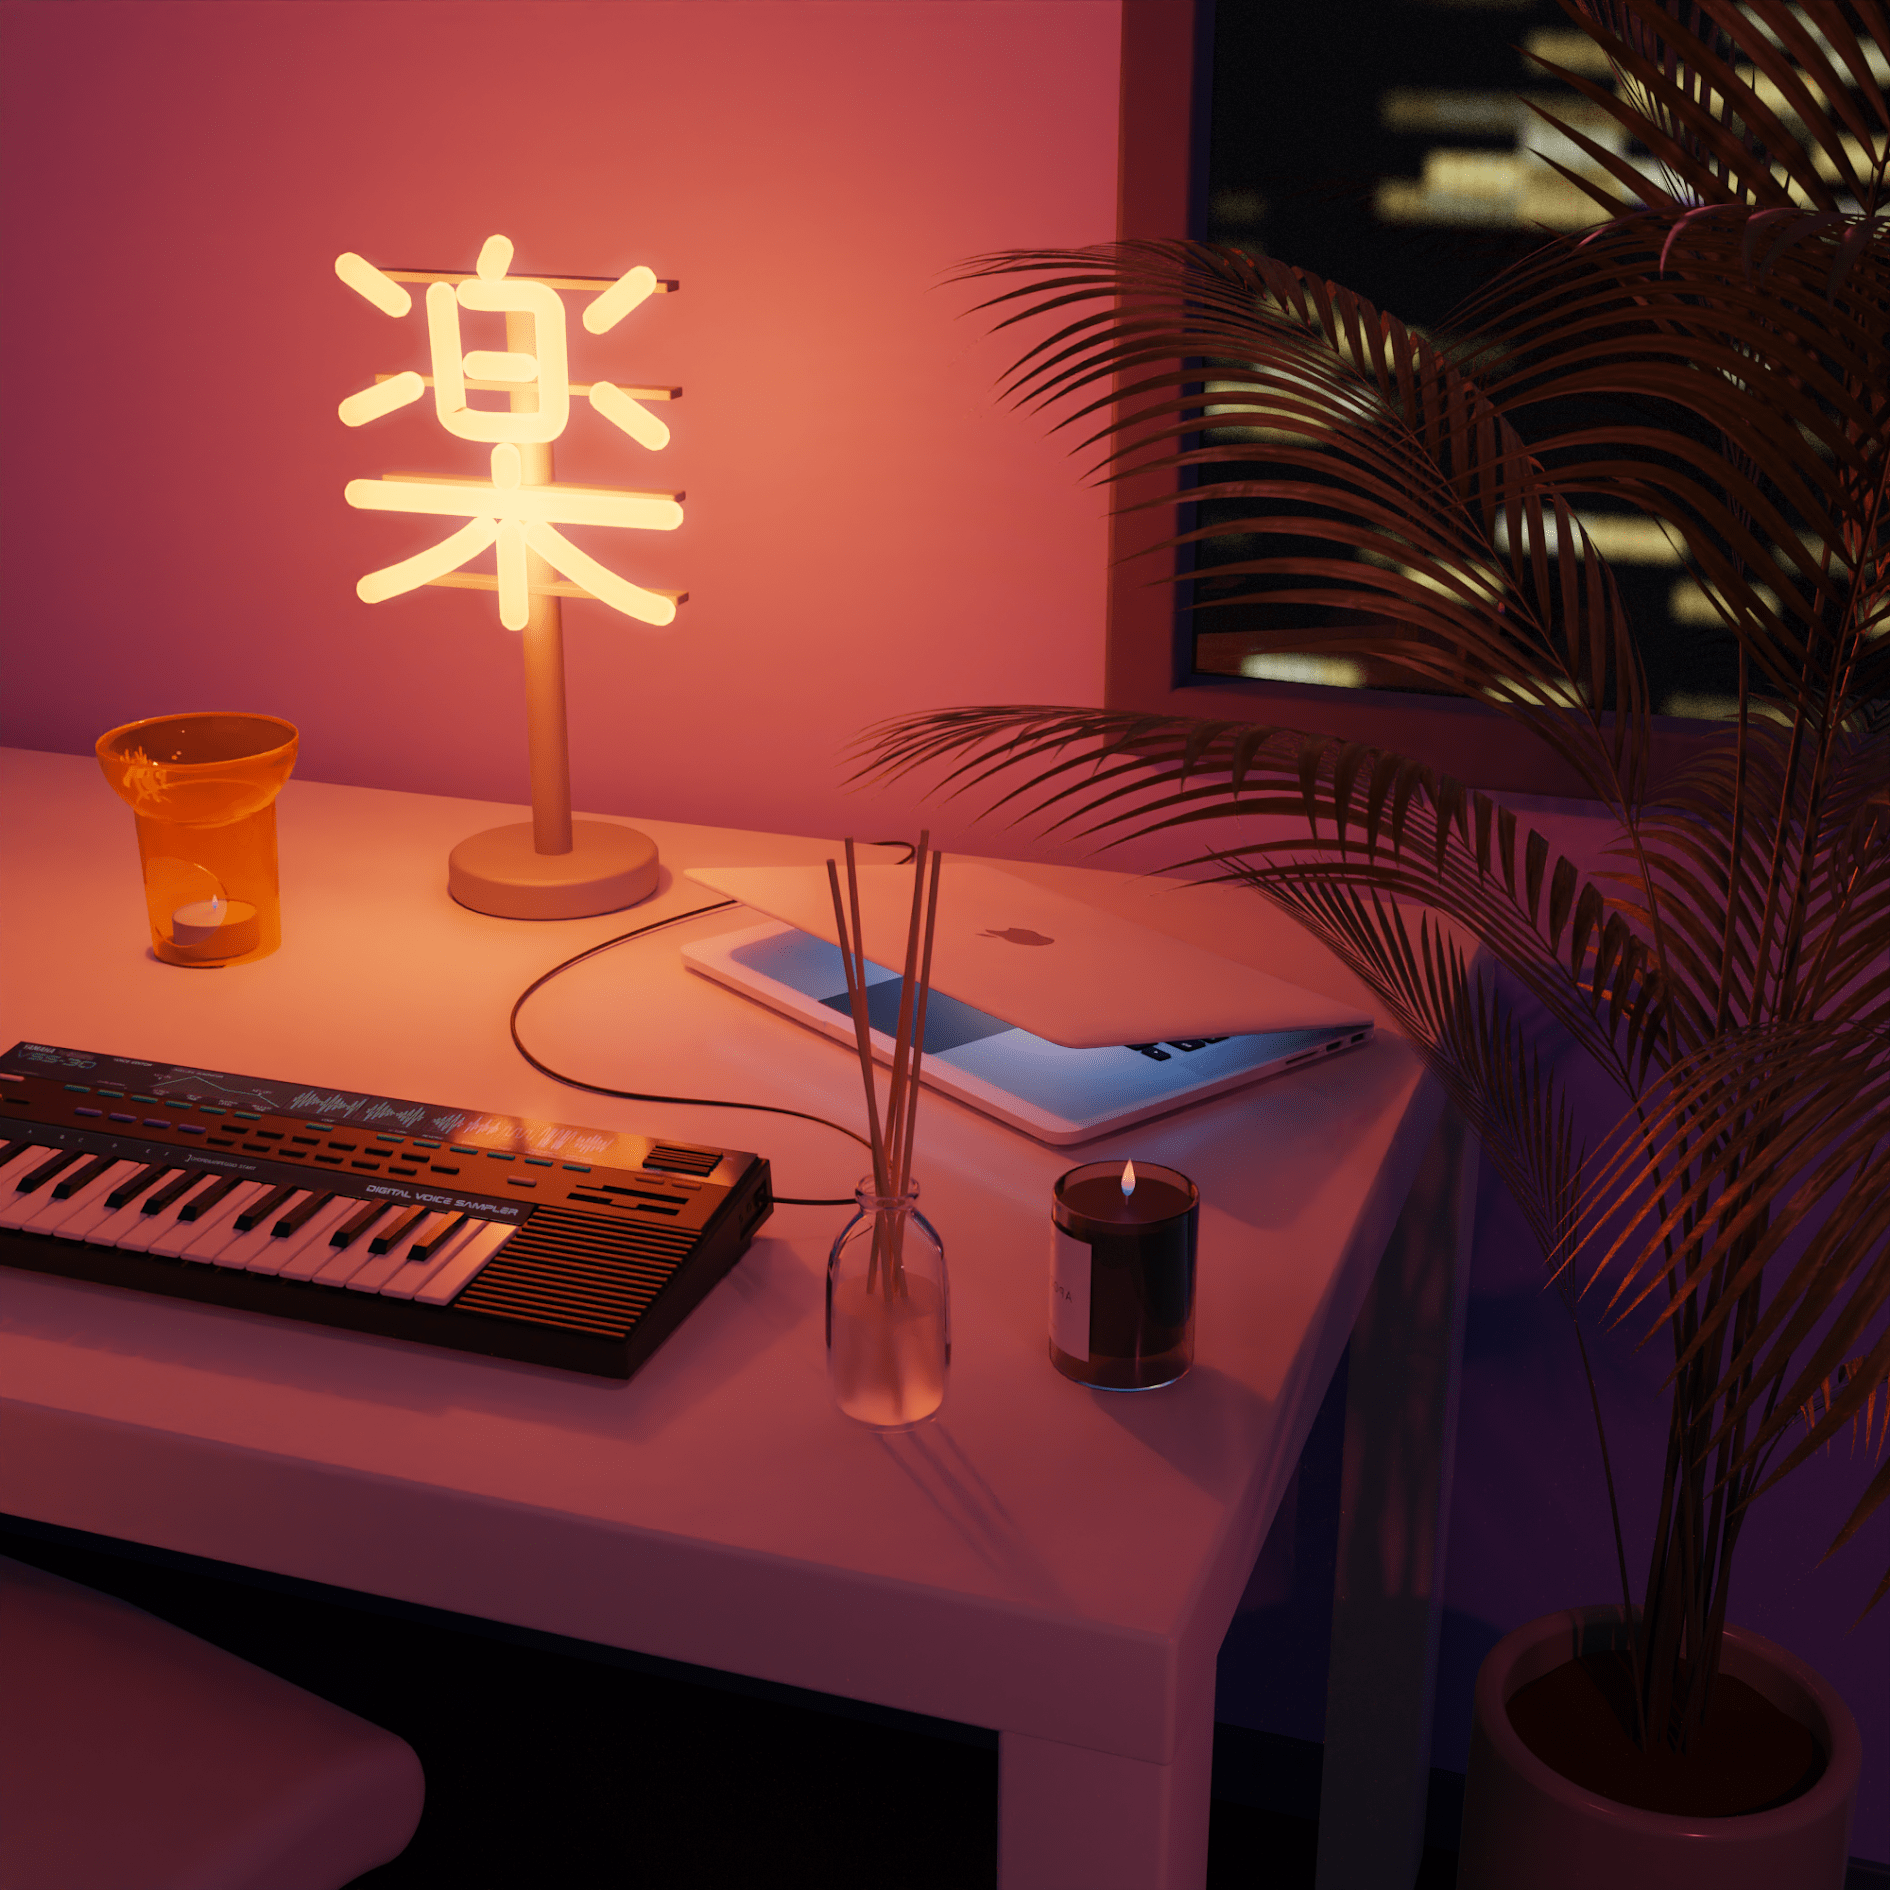 a neon sign with the character 楽 illuminates a desk with incense, a synthesizer keyboard, an oil candle, and a MacBook beside a palm plant